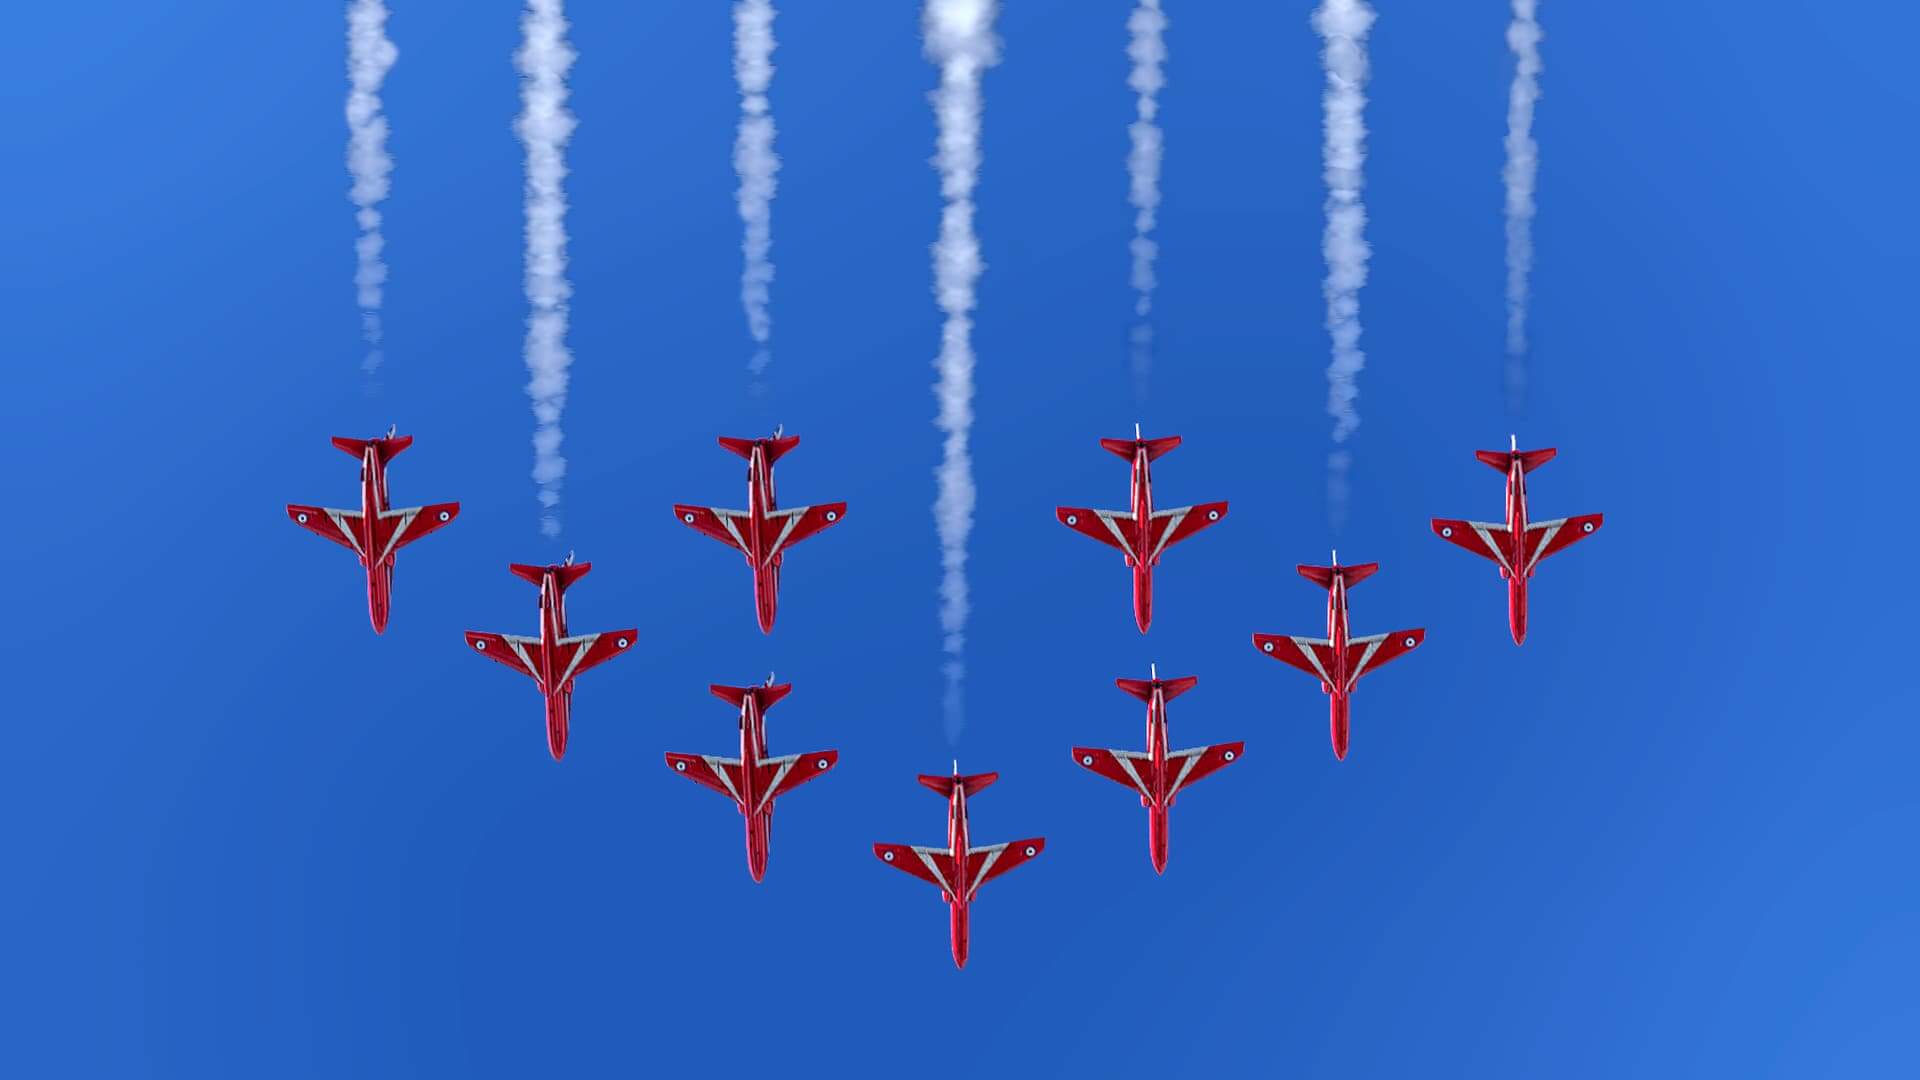 9 hawks of The Royal Air Force Aerobatic Team The Red Arrows fly in Vixen formation with white smoke plumes behind.